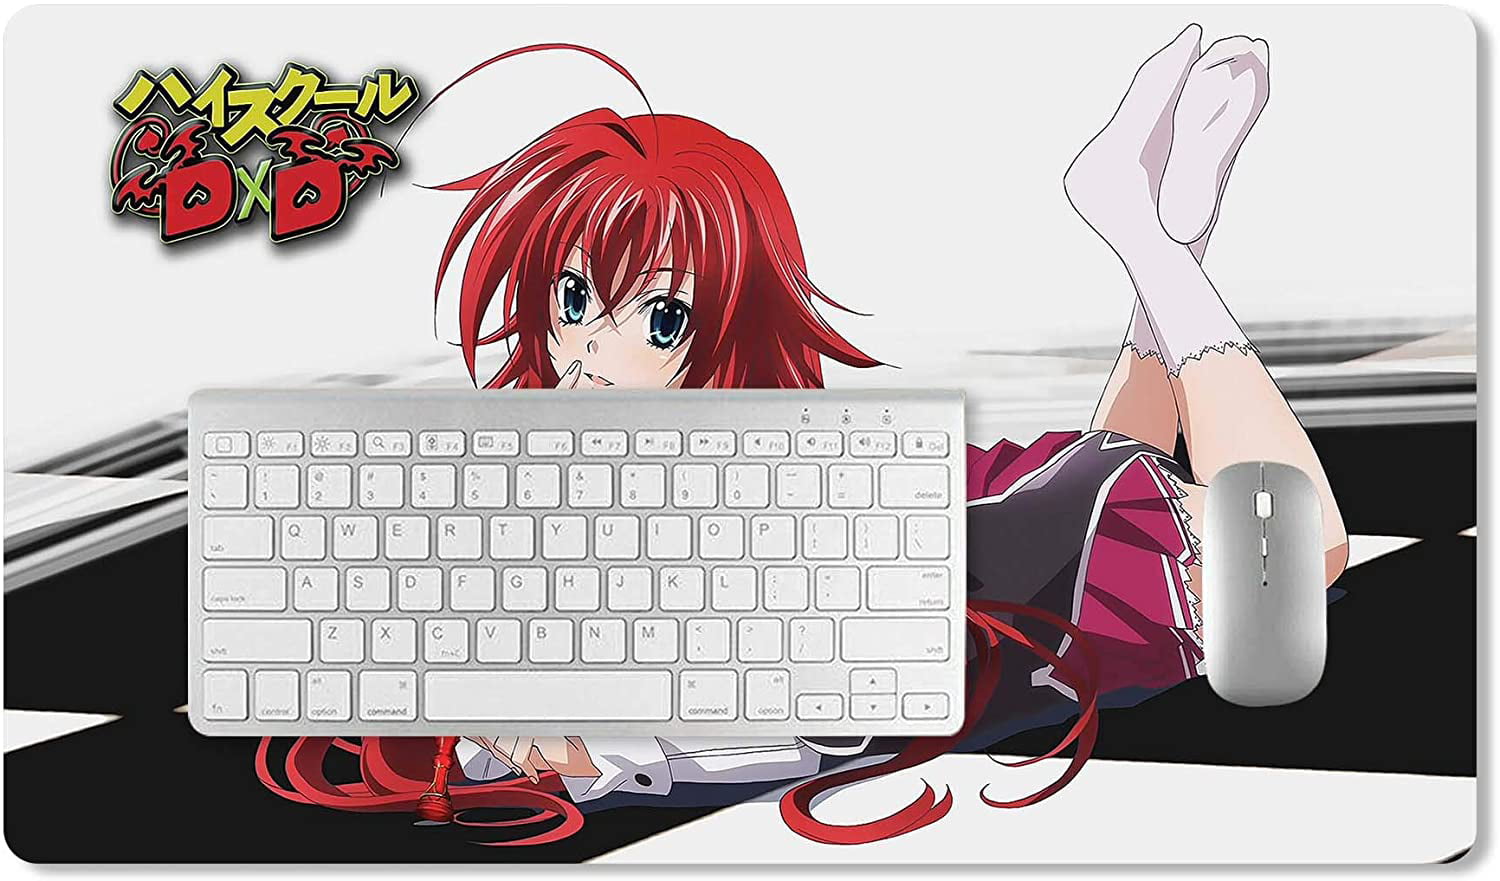 High School DXD Mouse Pad Rias Gremory Anime Girl Keyboard Pad Gaming Play Mat 